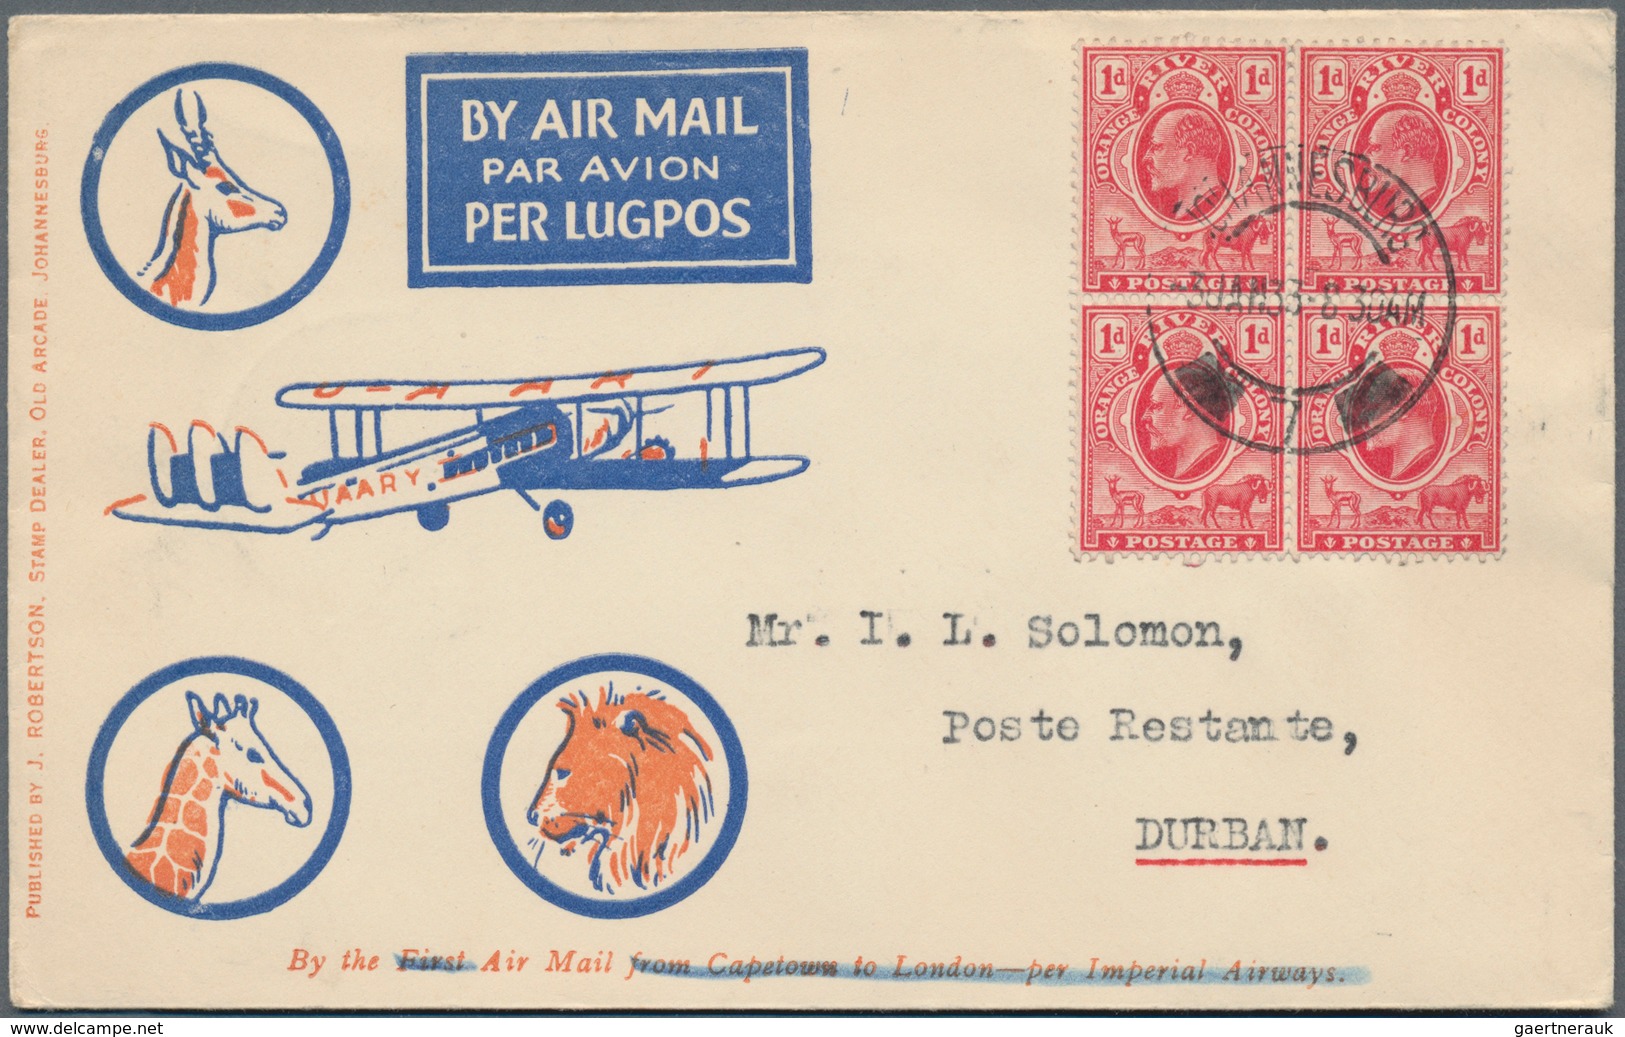 Flugpost Alle Welt: 1910 from ca., comprehensive collection with ca.100 airmail covers/cards, compri